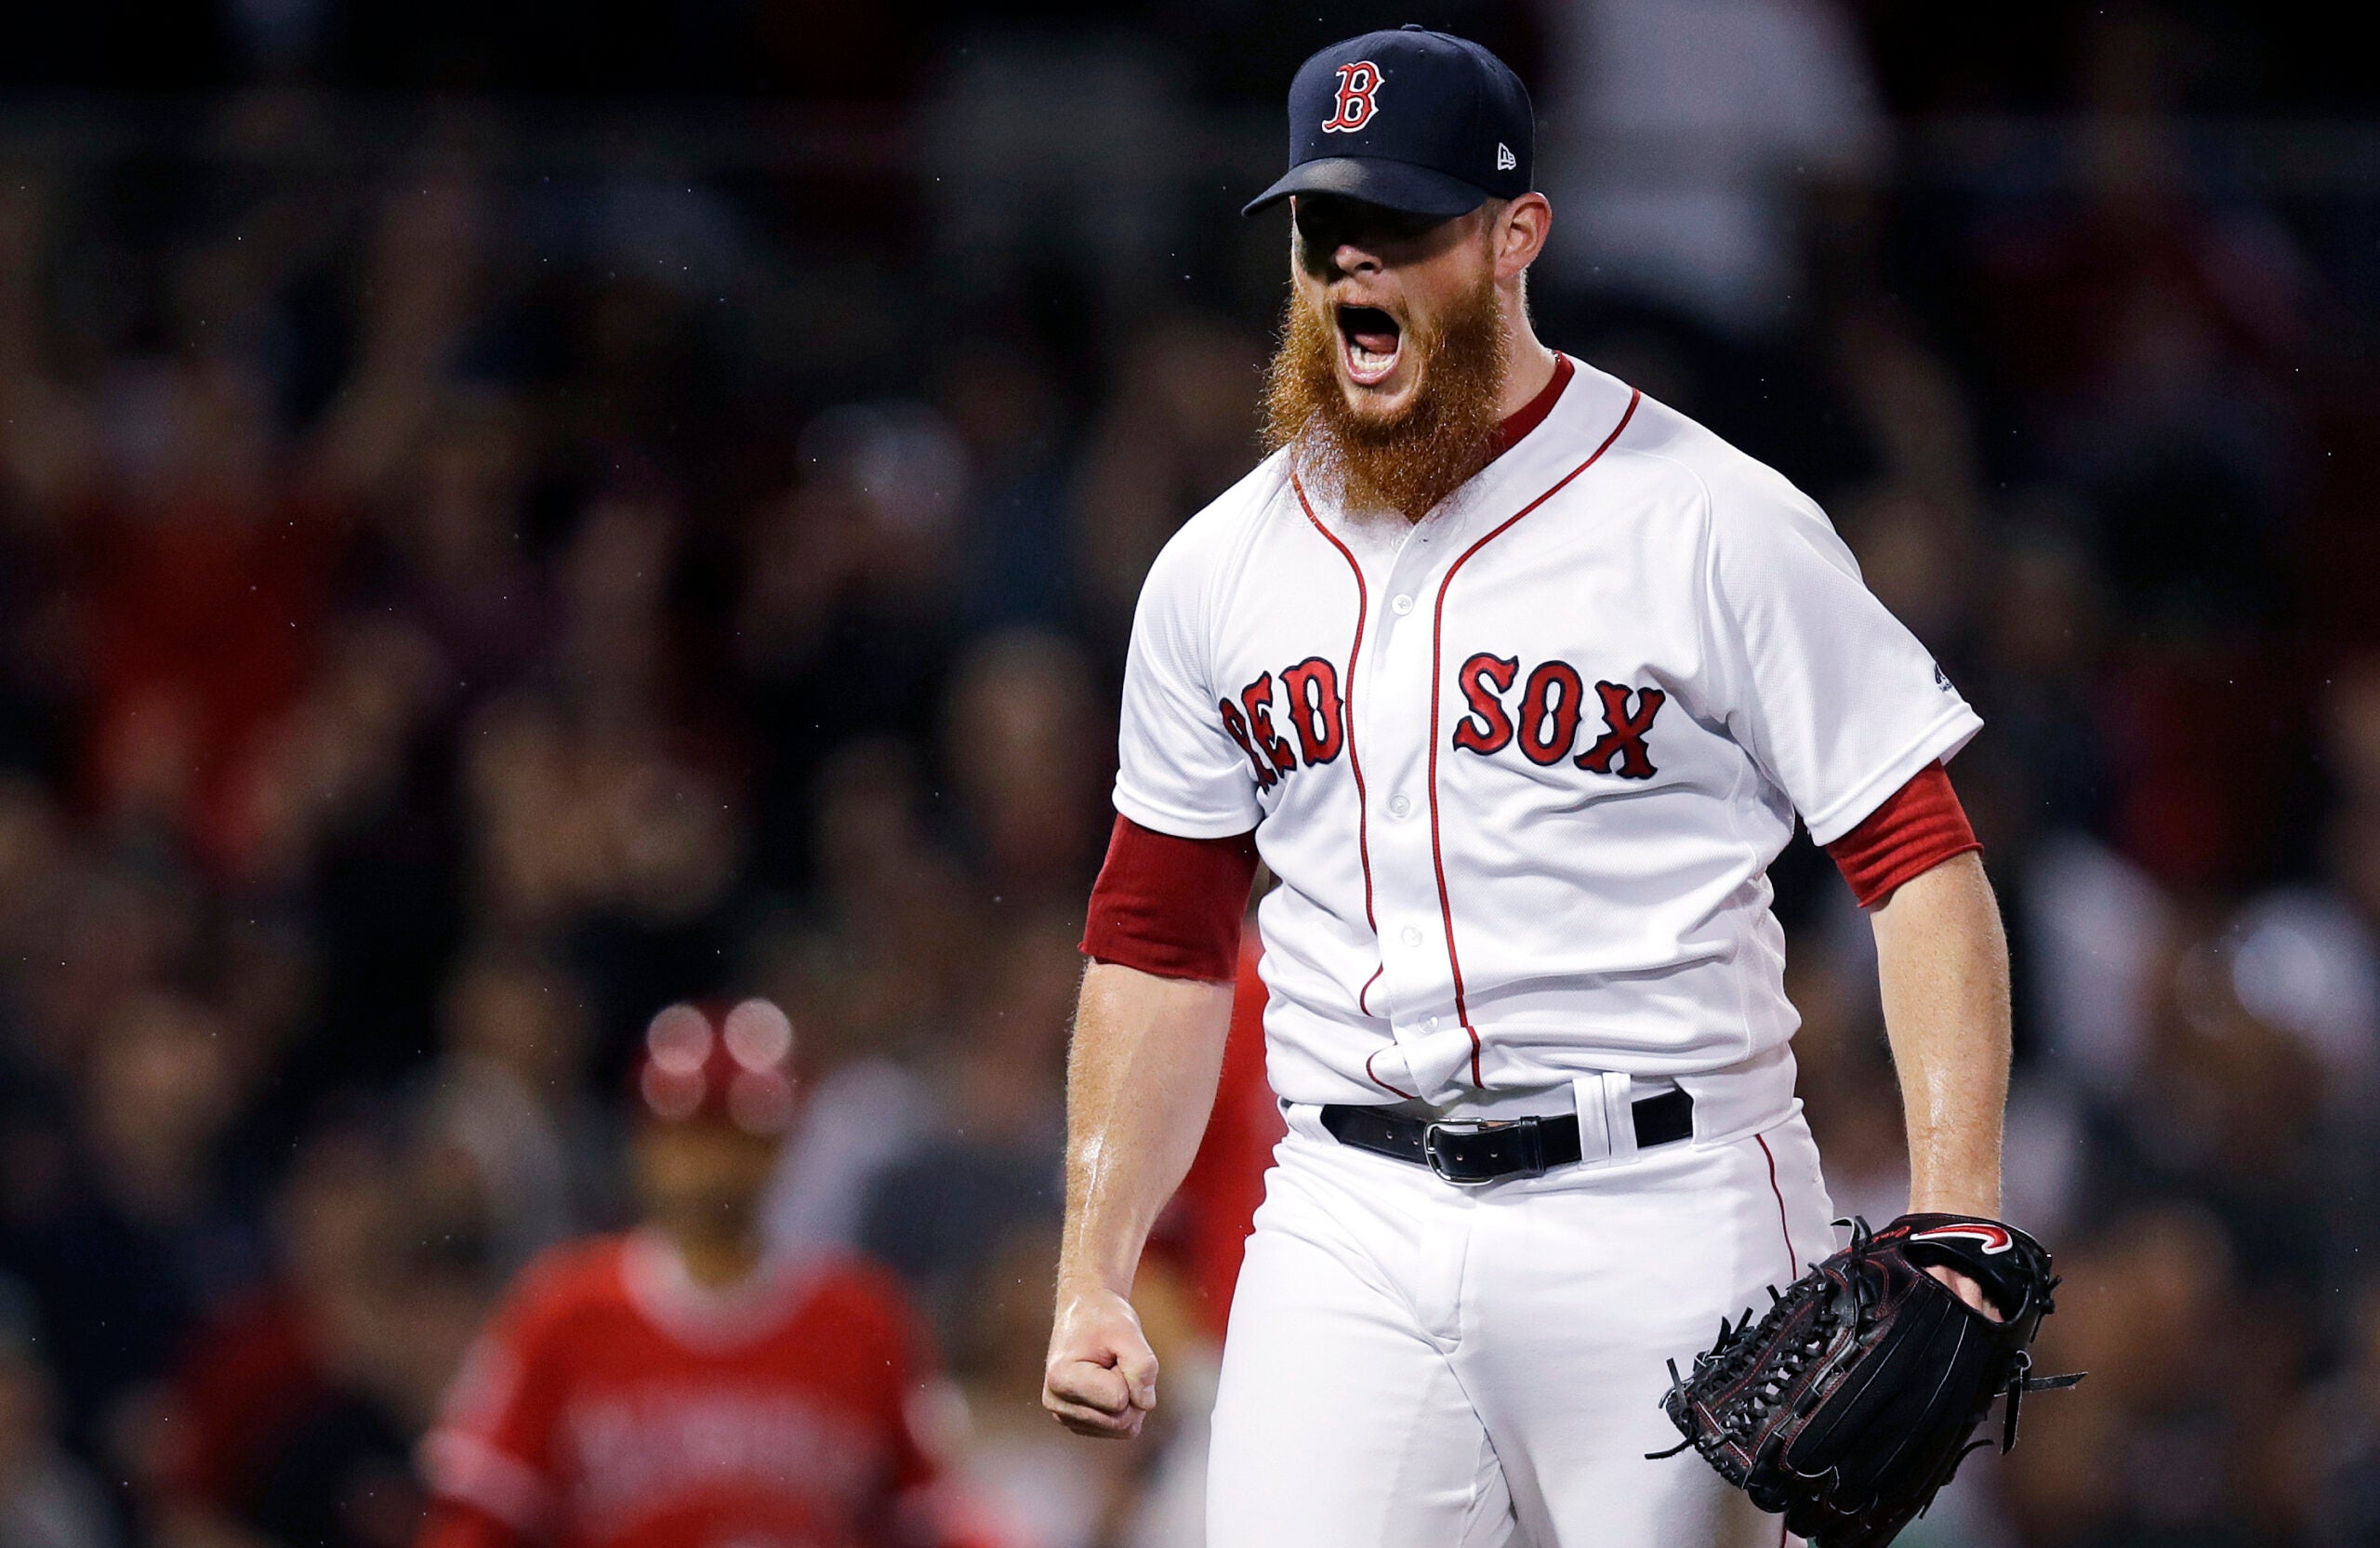 Craig Kimbrel provides finishing touches on Red Sox' first win